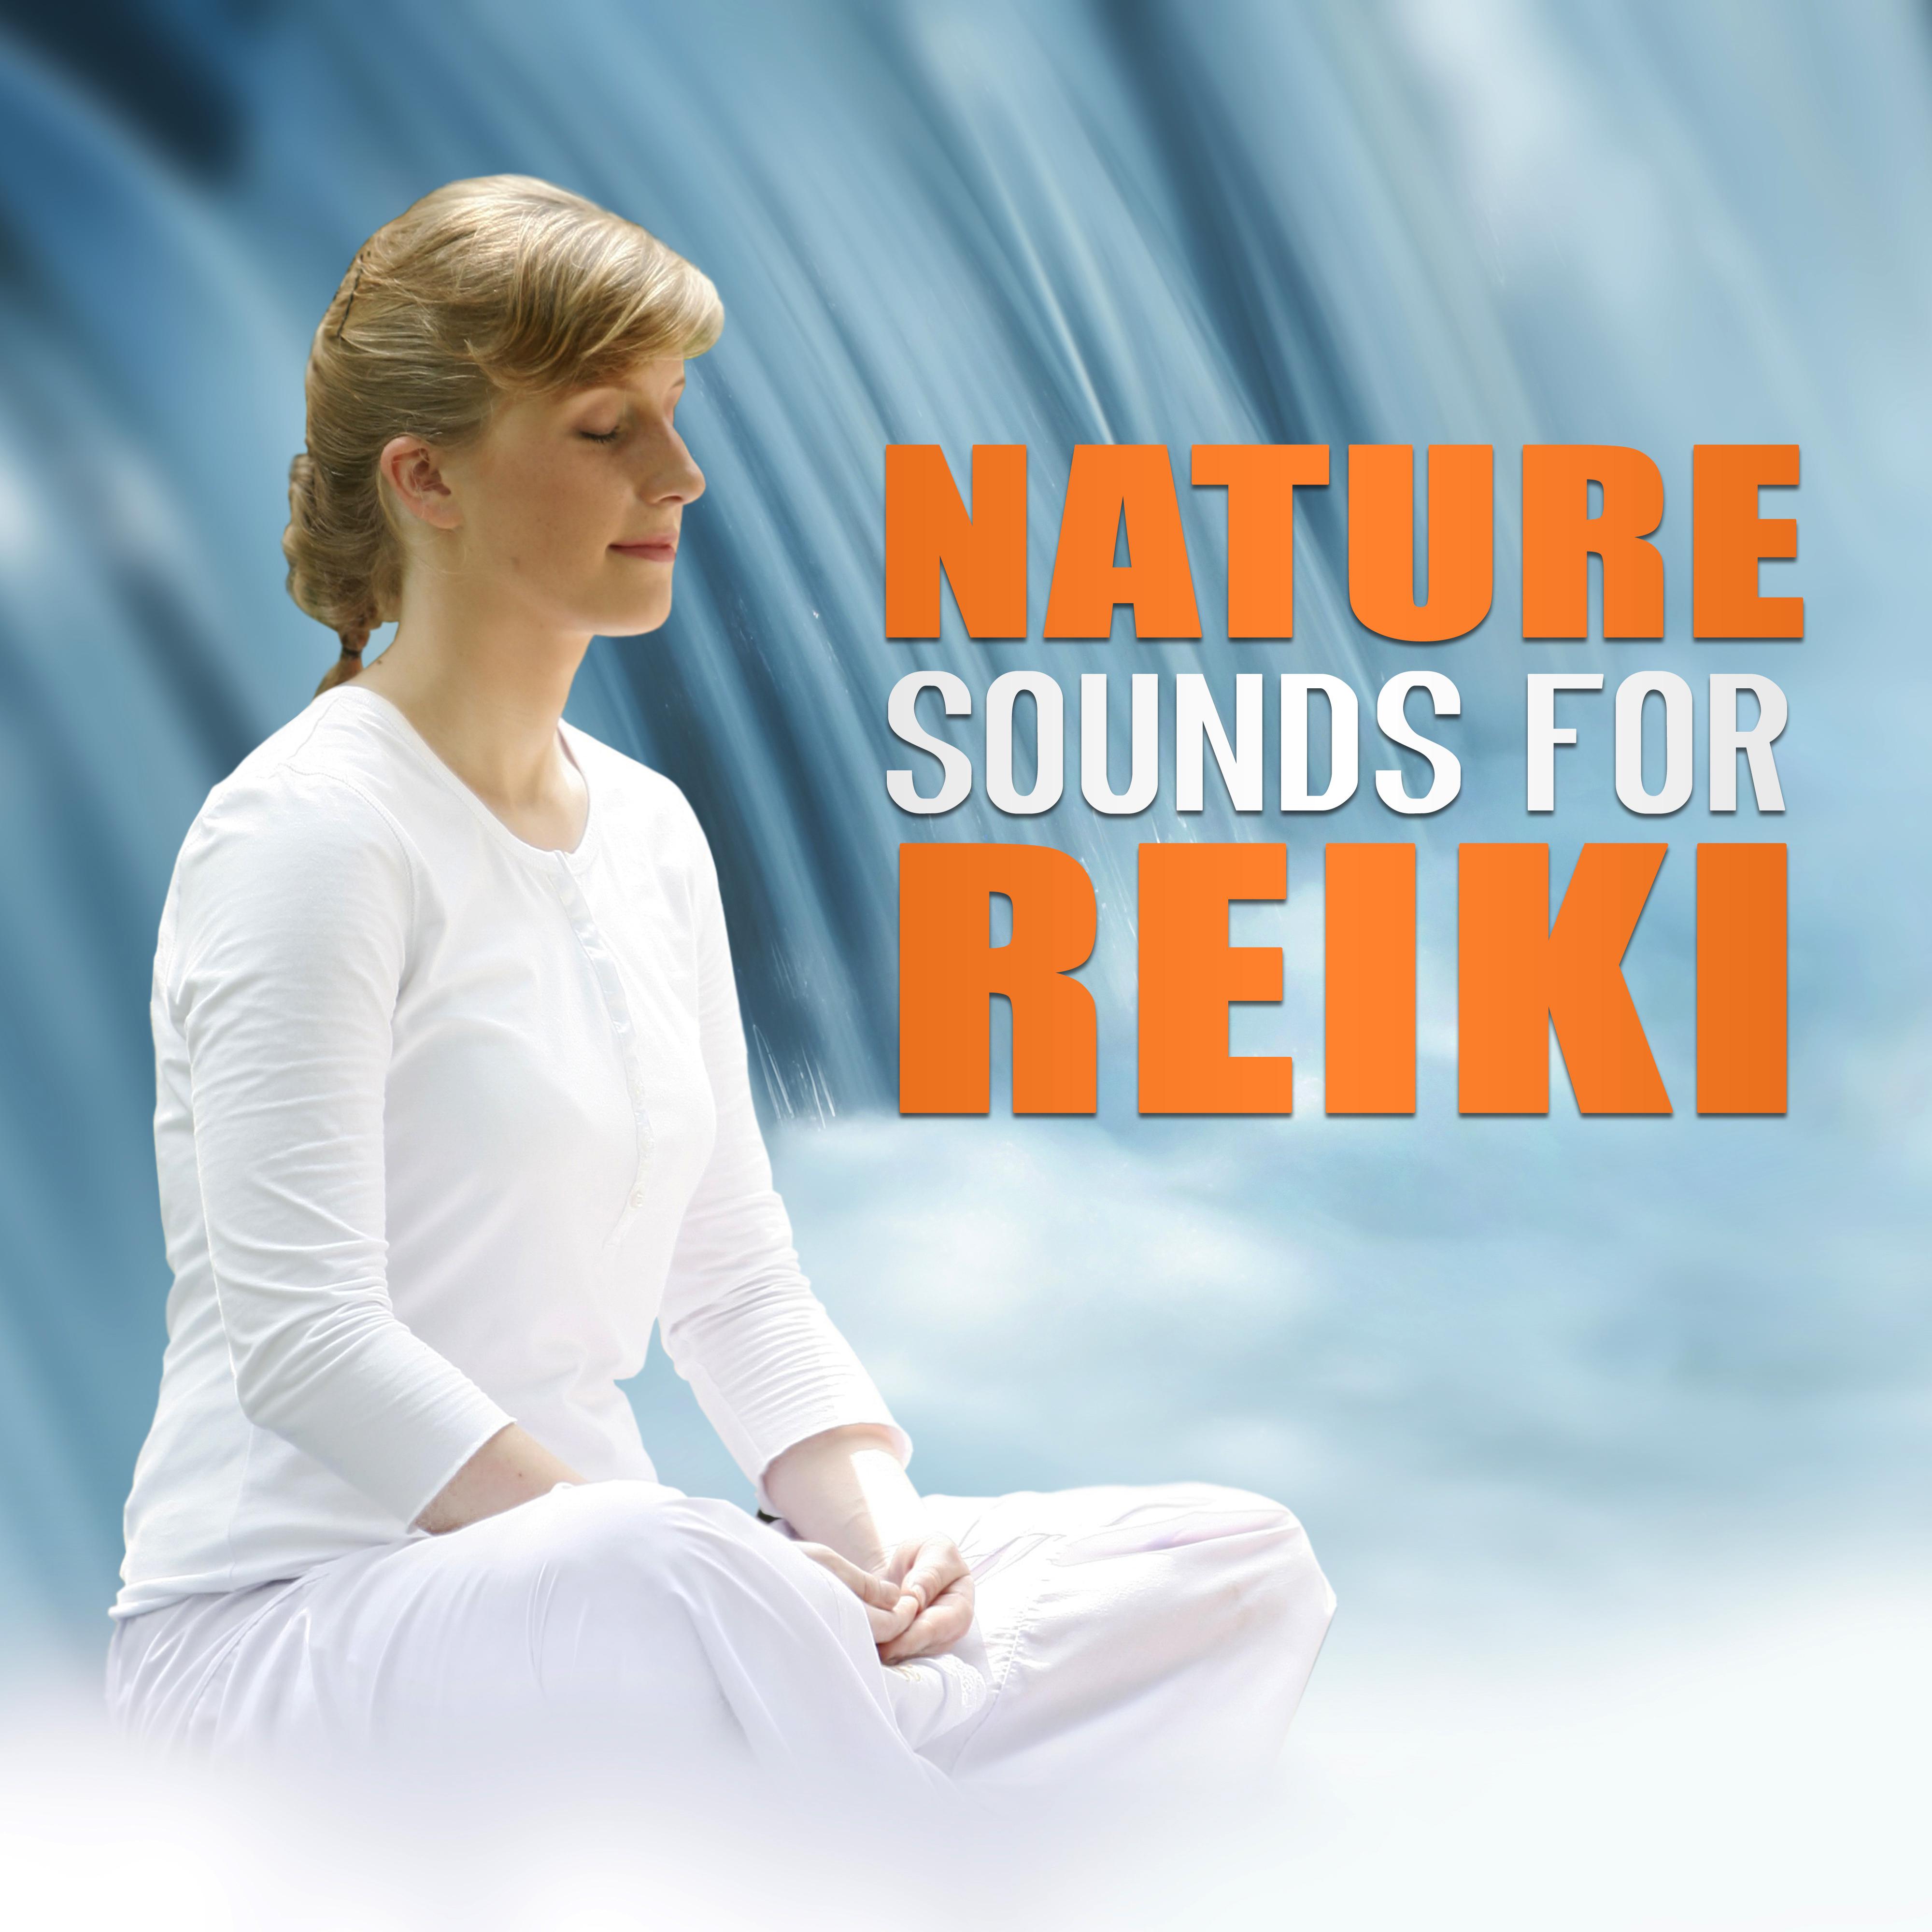 Nature Sounds for Reiki - Reiki Therapy, Inner Silence, Relaxation, Calm Meditation, Yoga, Spa Sounds